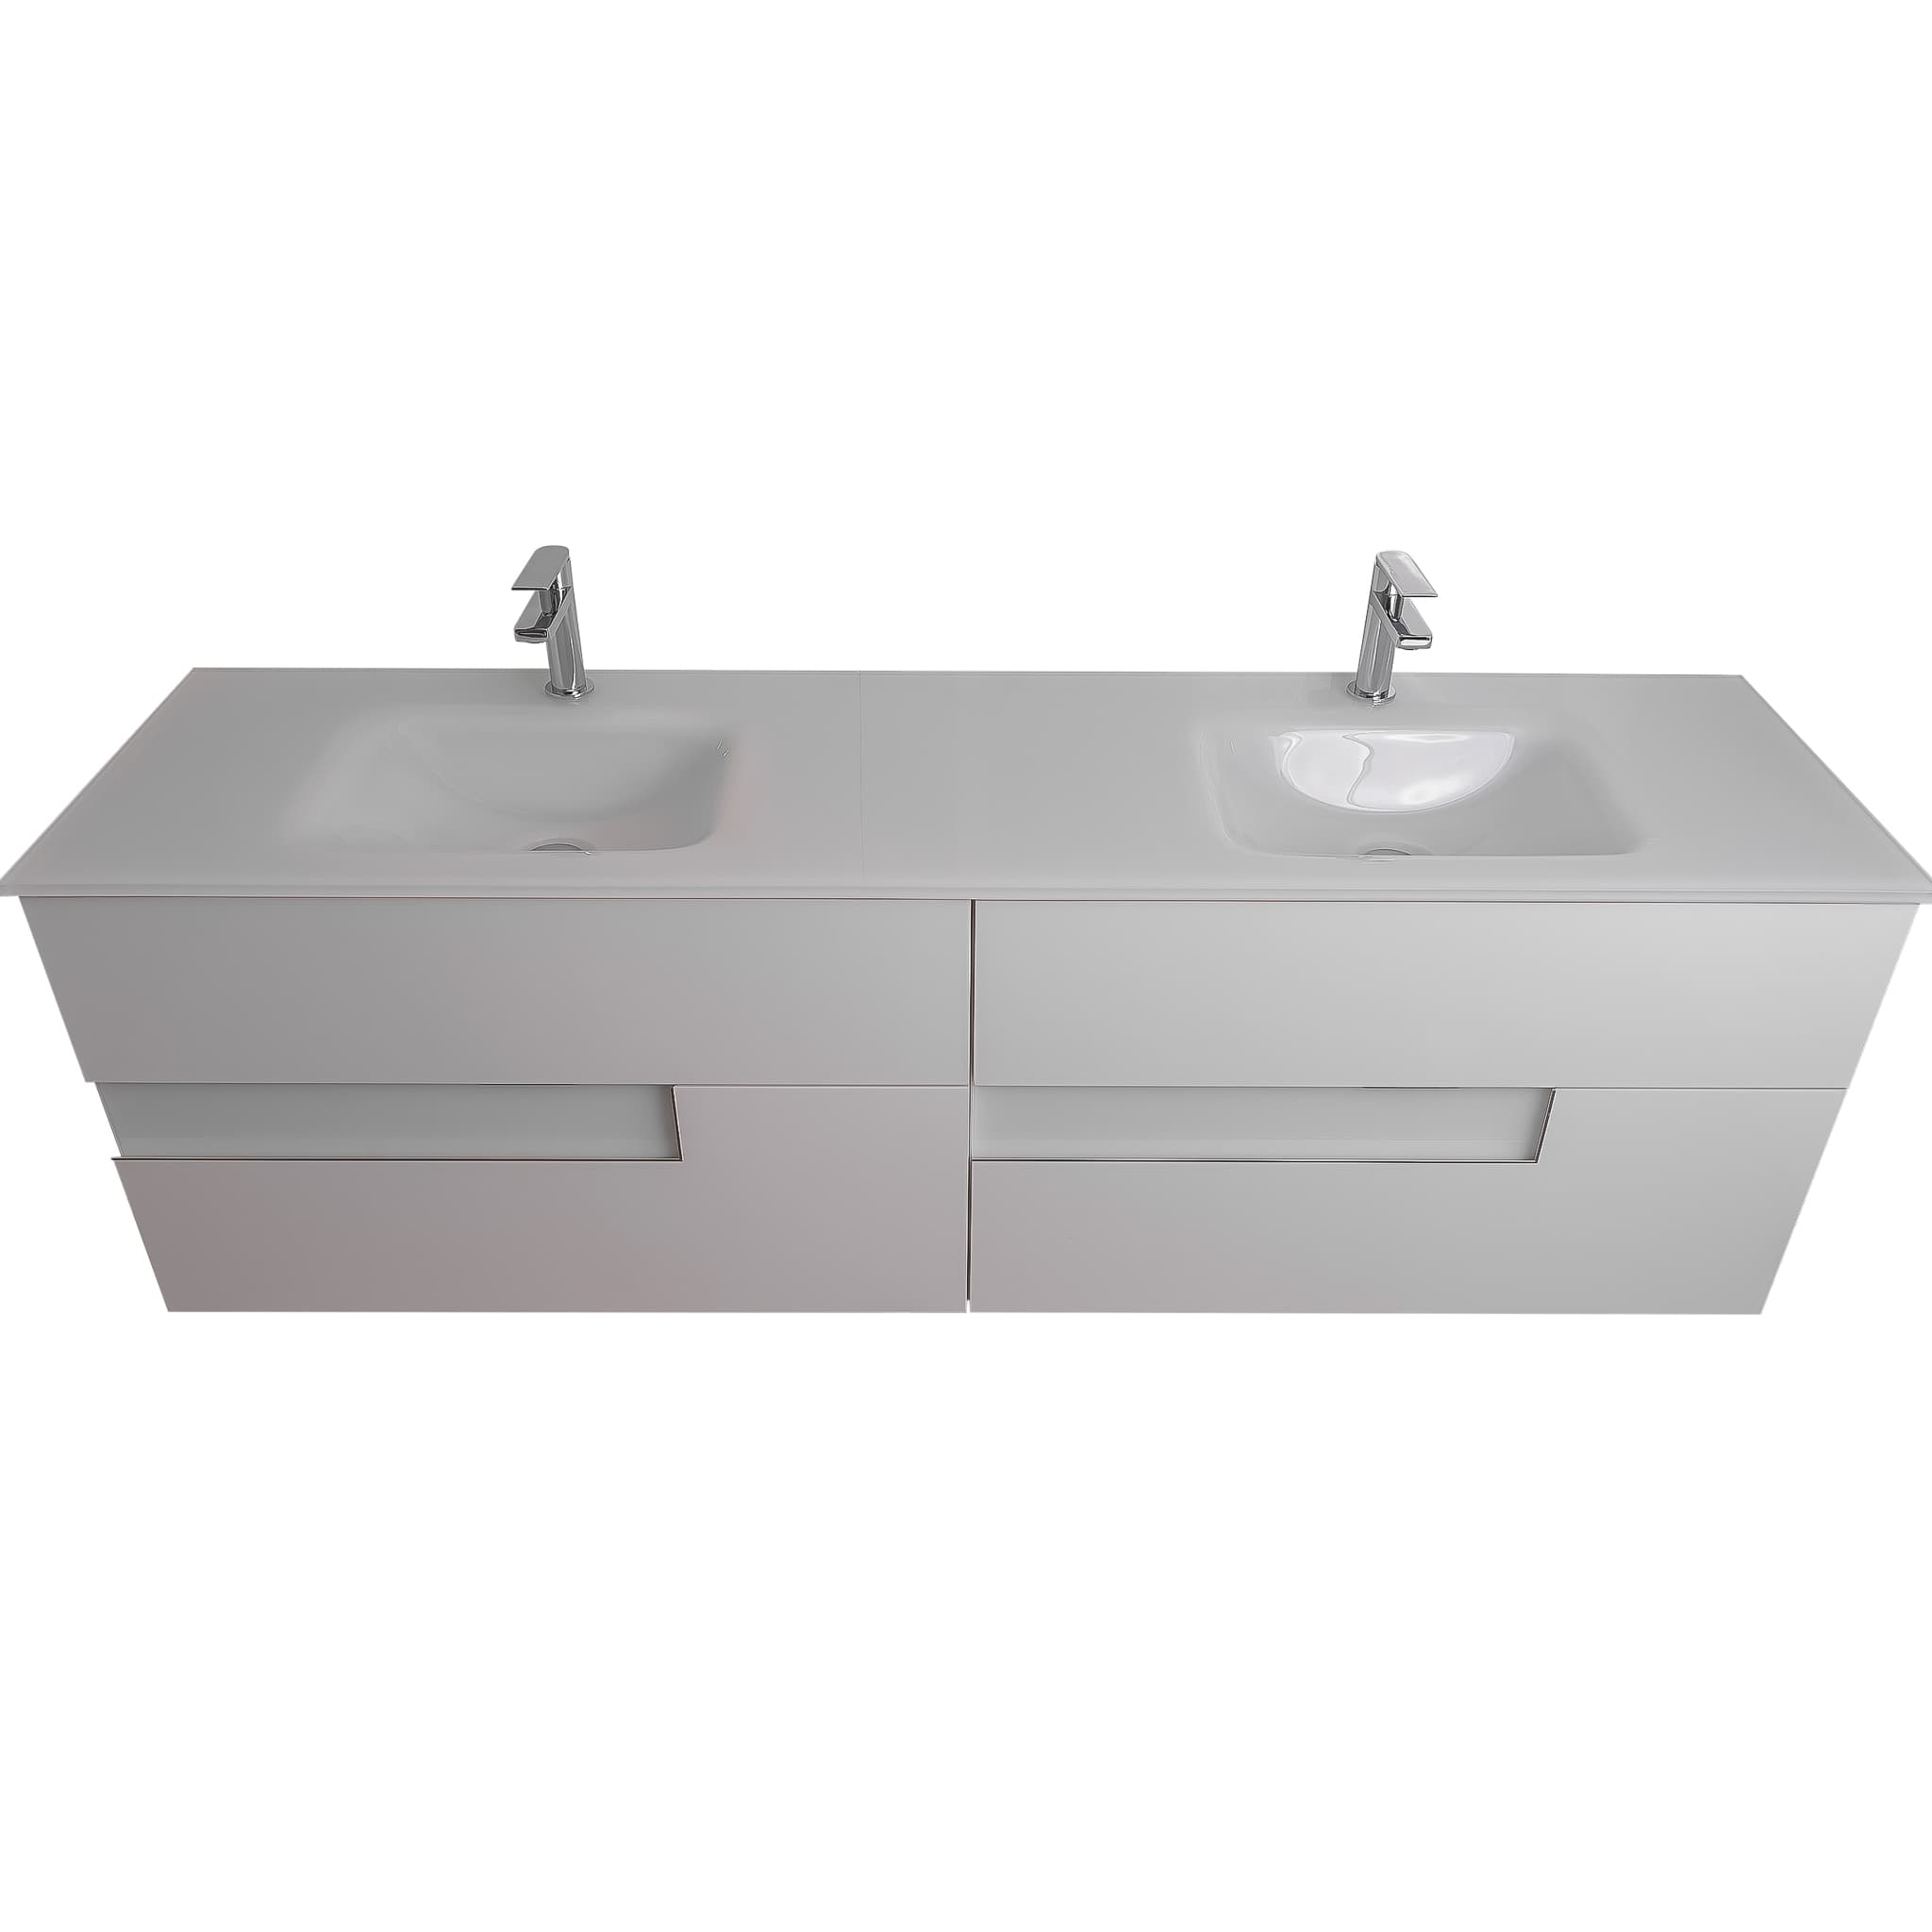 Vision 63 White High Gloss Cabinet, White Tempered Glass Double Sink, Wall Mounted Modern Vanity Set